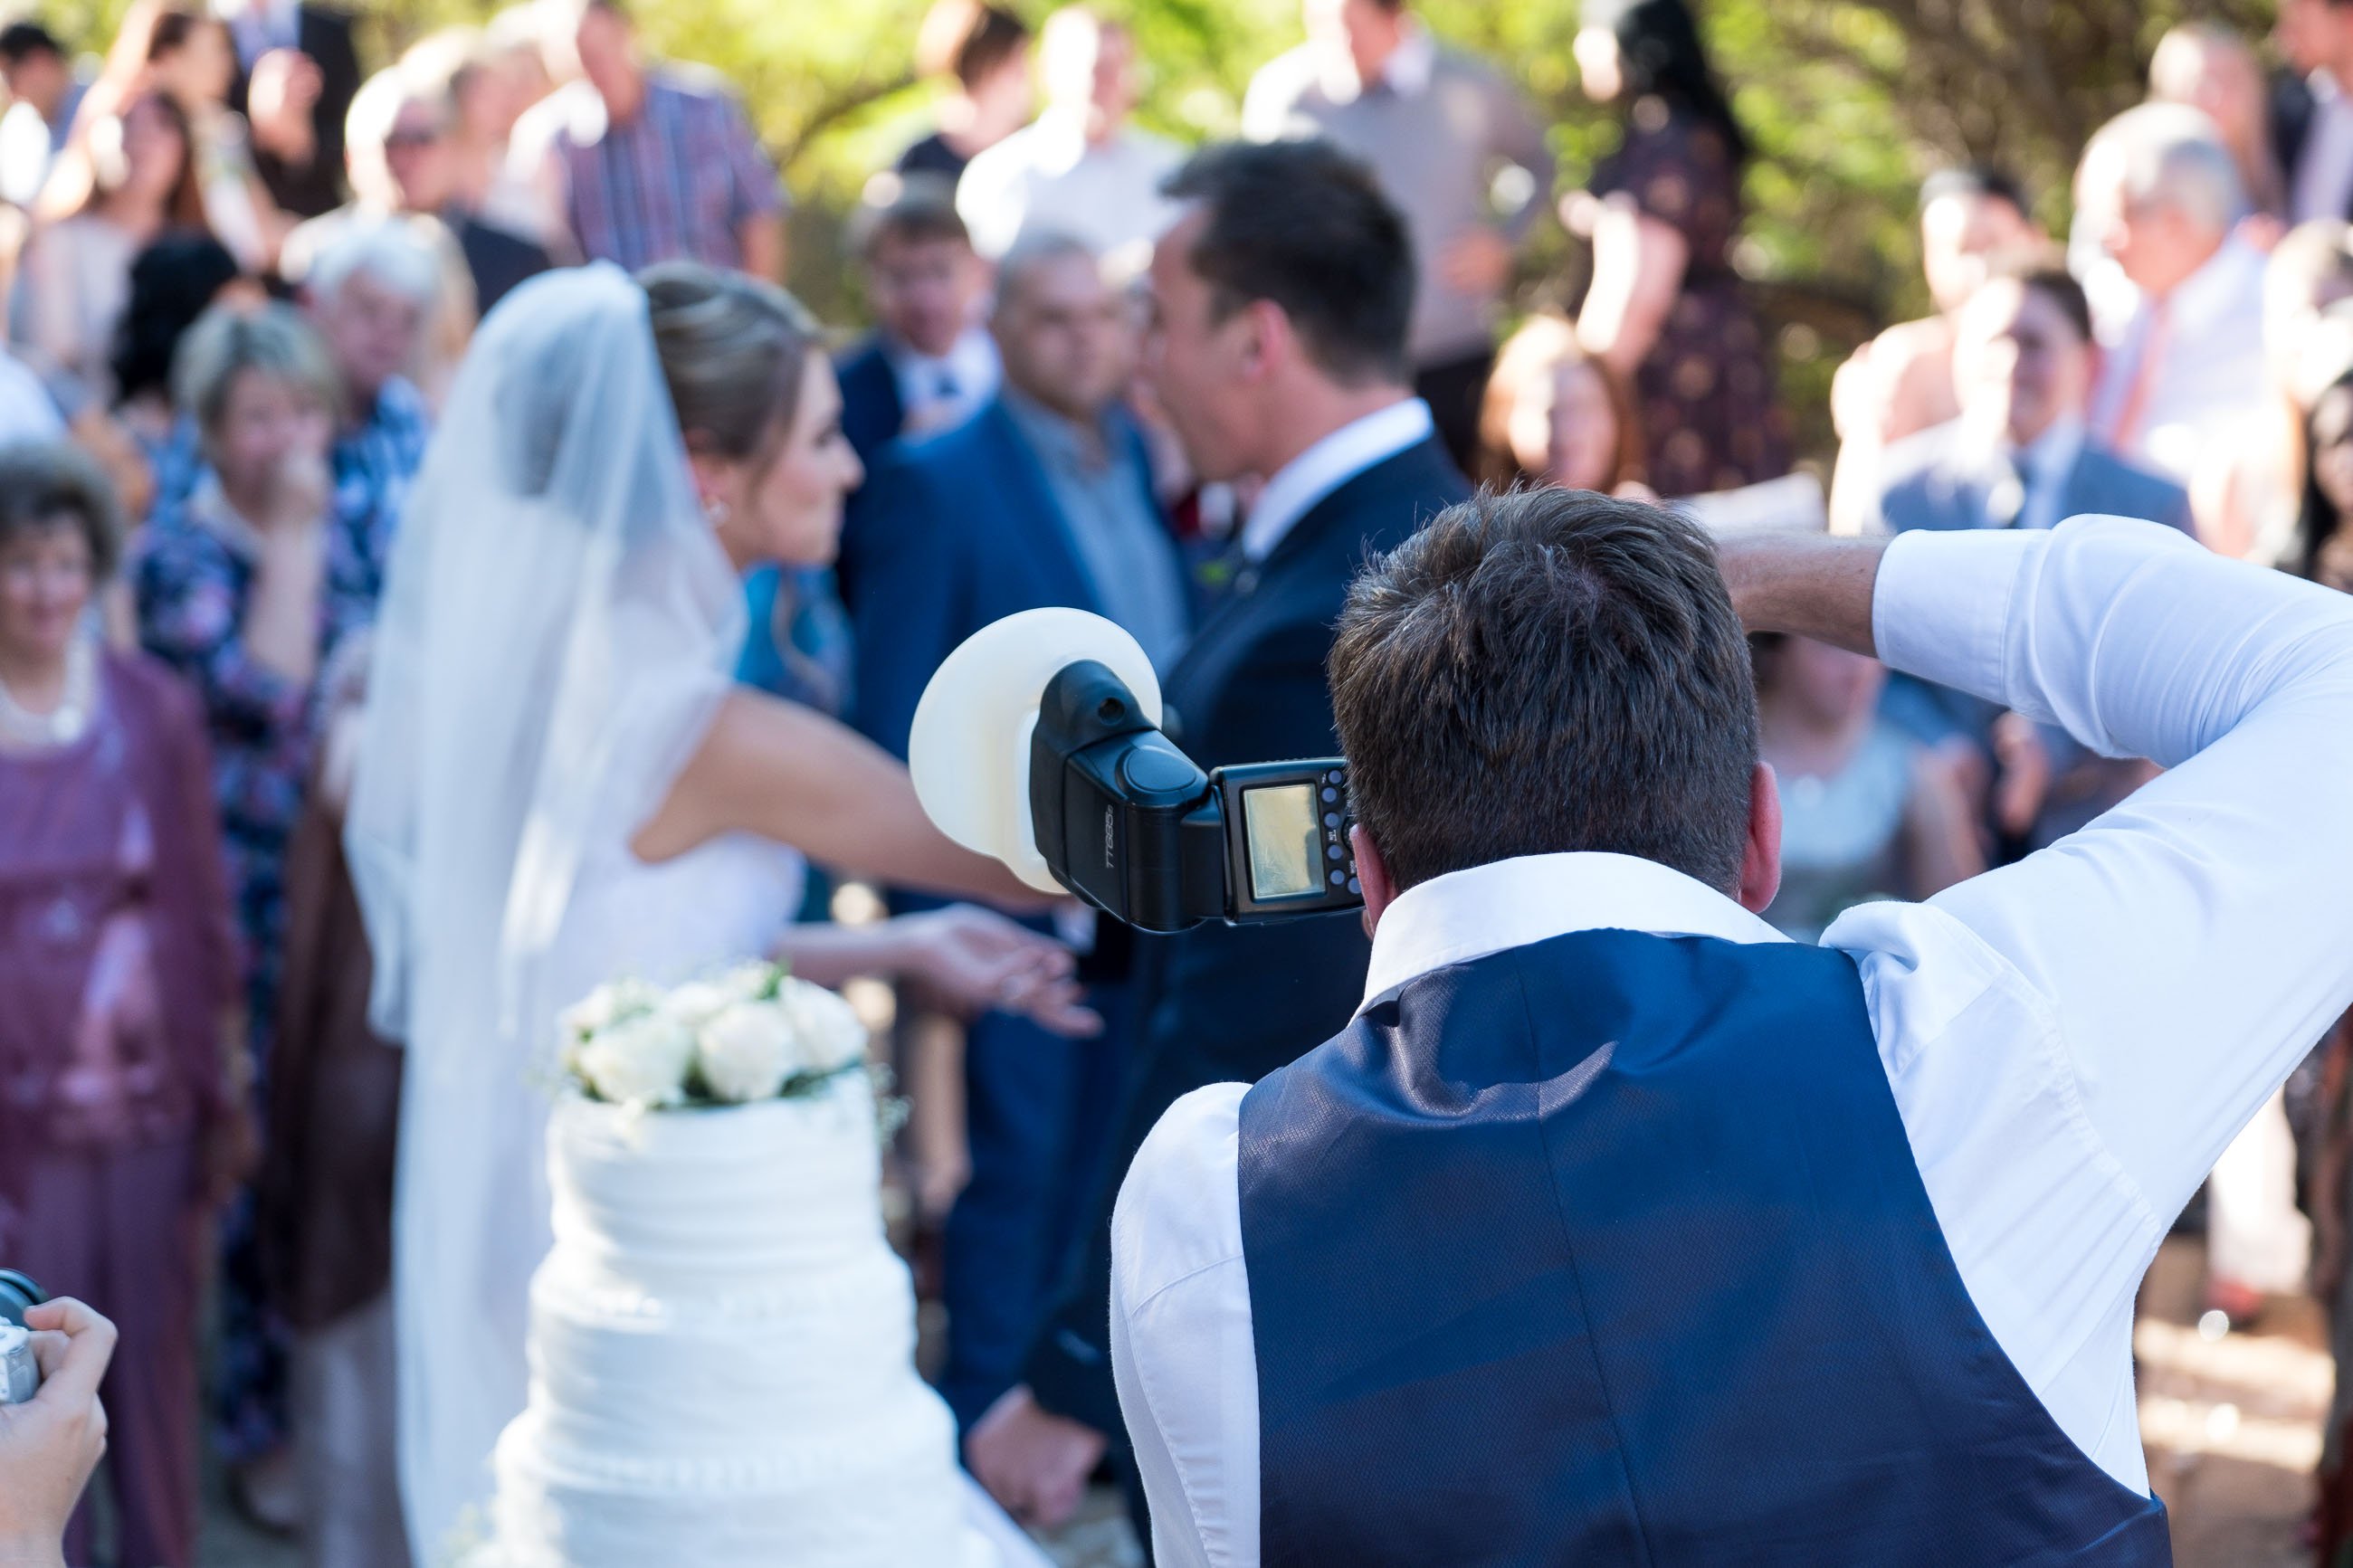 Warren James Photography using MagMod MagSphere for wedding photos